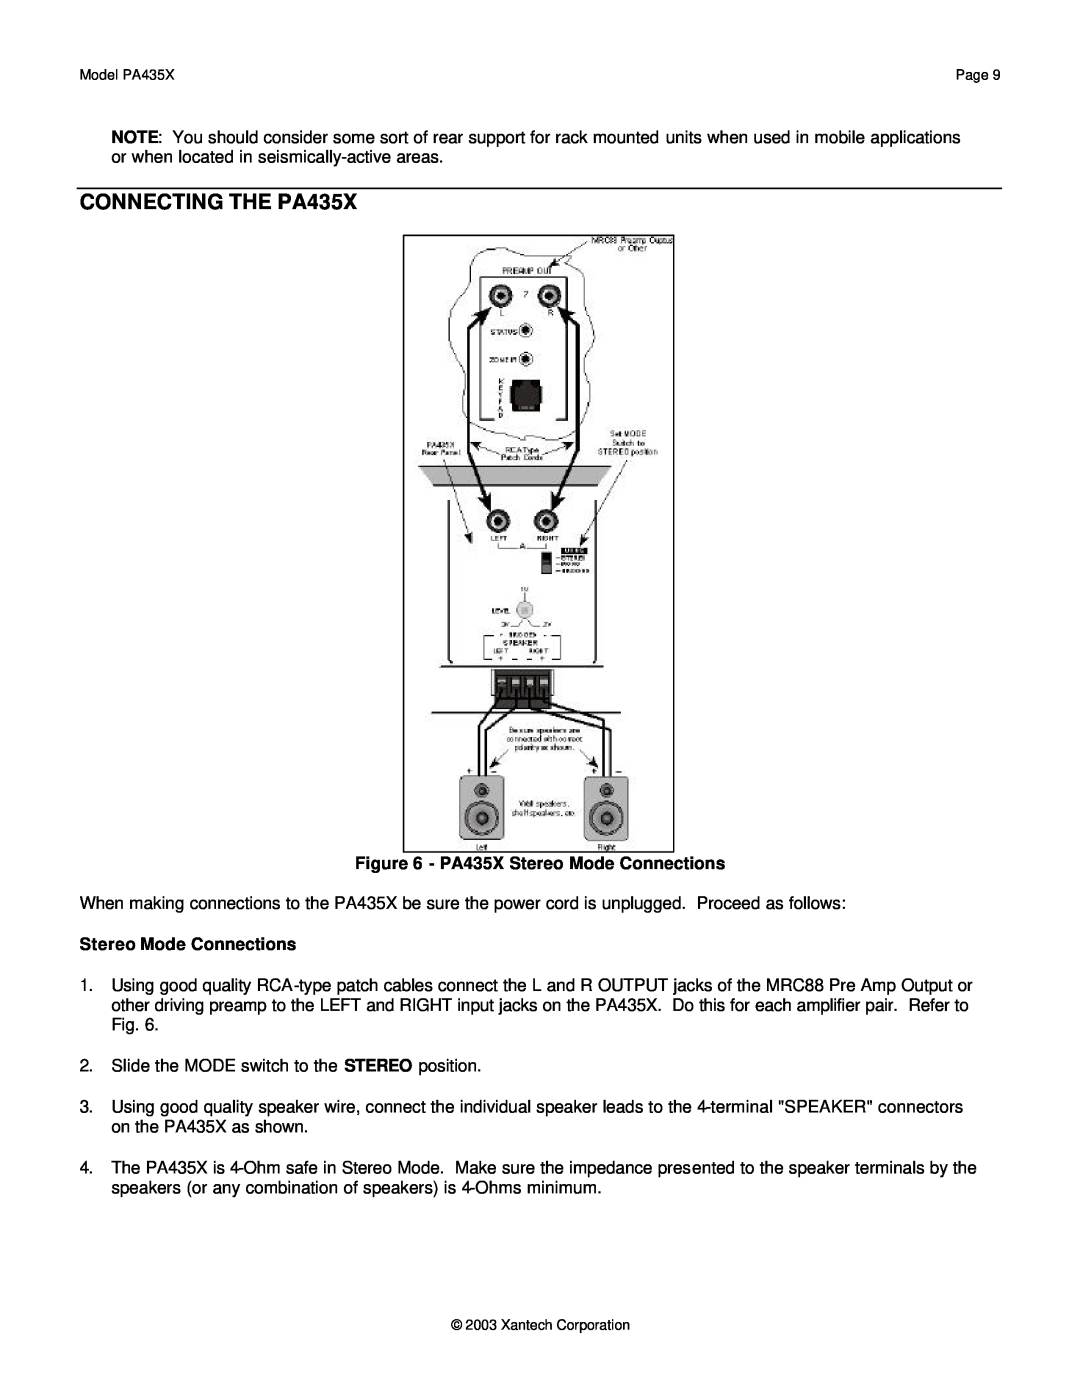 Xantech installation instructions CONNECTING THE PA435X, PA435X Stereo Mode Connections 